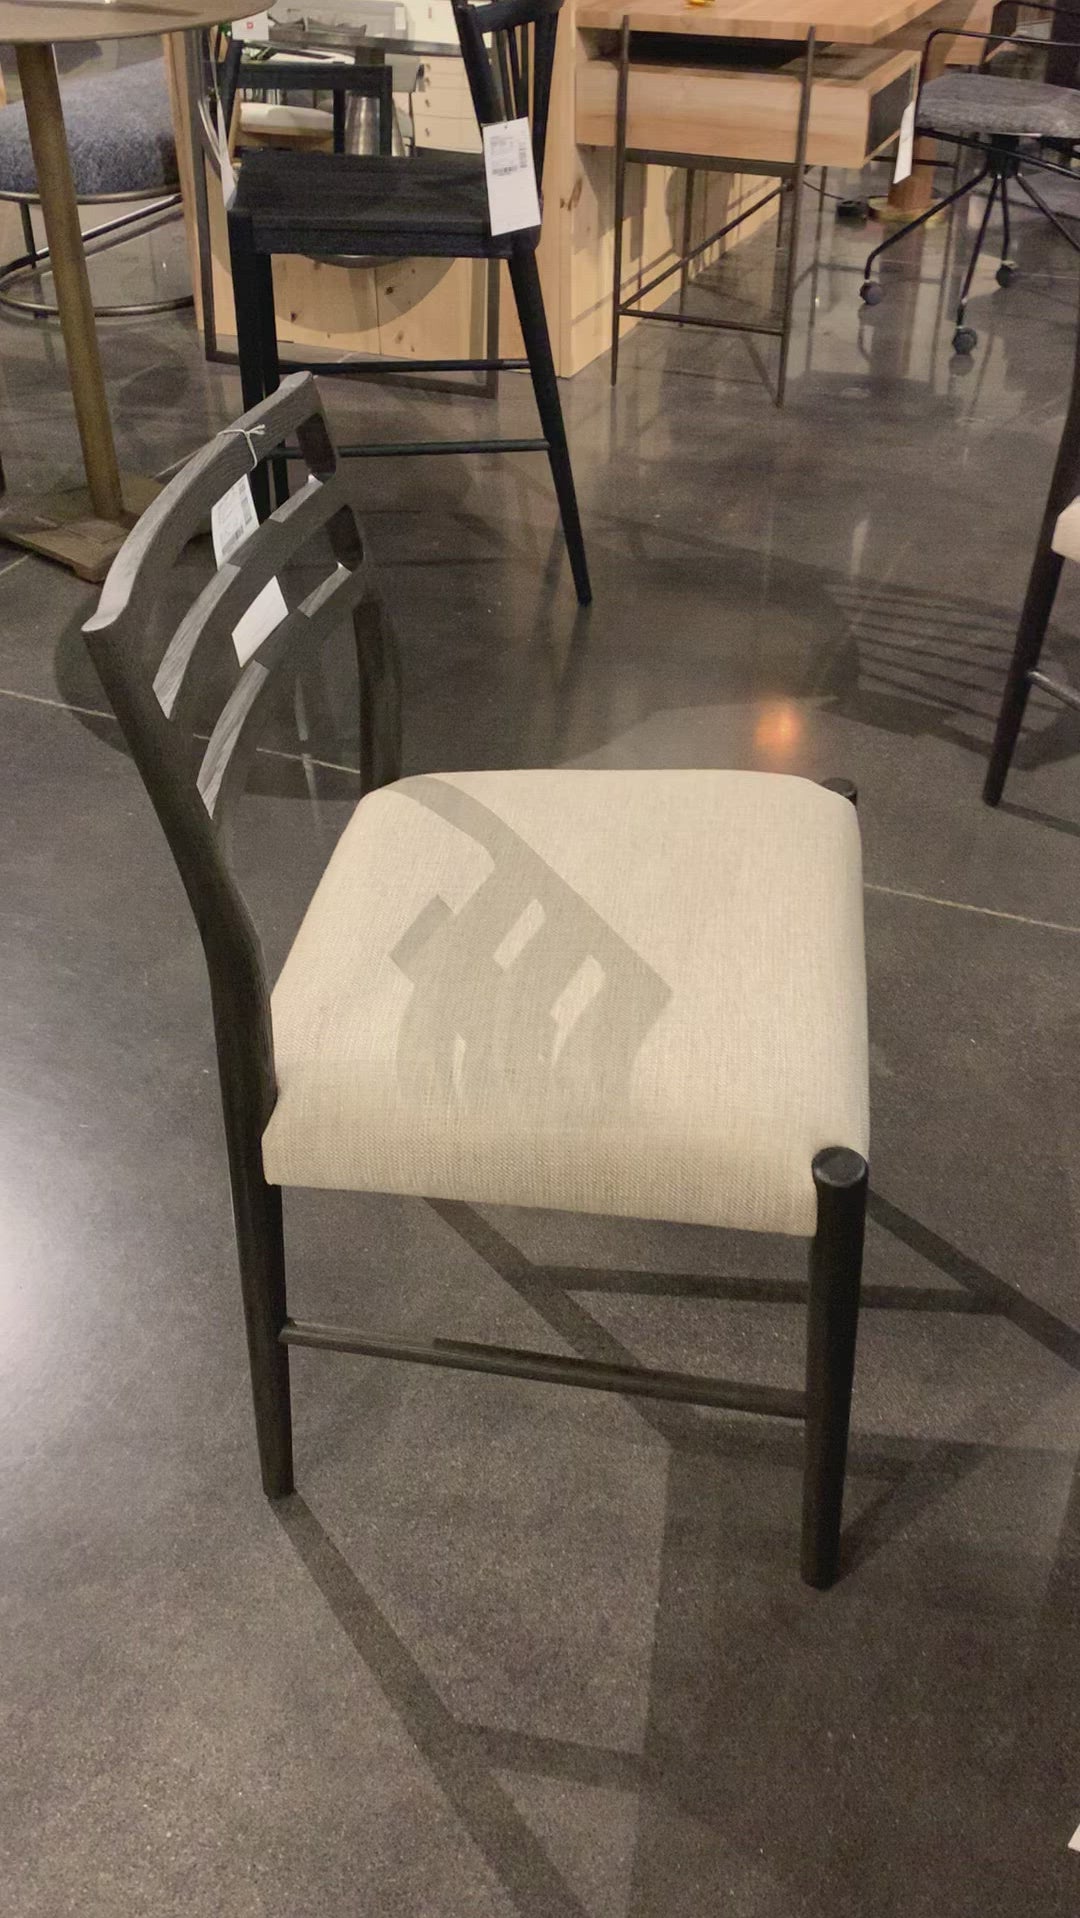 We love the ladderback chair of this Glenmore Light Carbon Dining Chair. The carbon-toned seating blends cotton with linen and elevates the space for any dining room or kitchen area.   Overall Dimensions: 21.75"w x 22.00"d x 34.00"h Seat Depth: 17.72" Seat Height: 18.9"